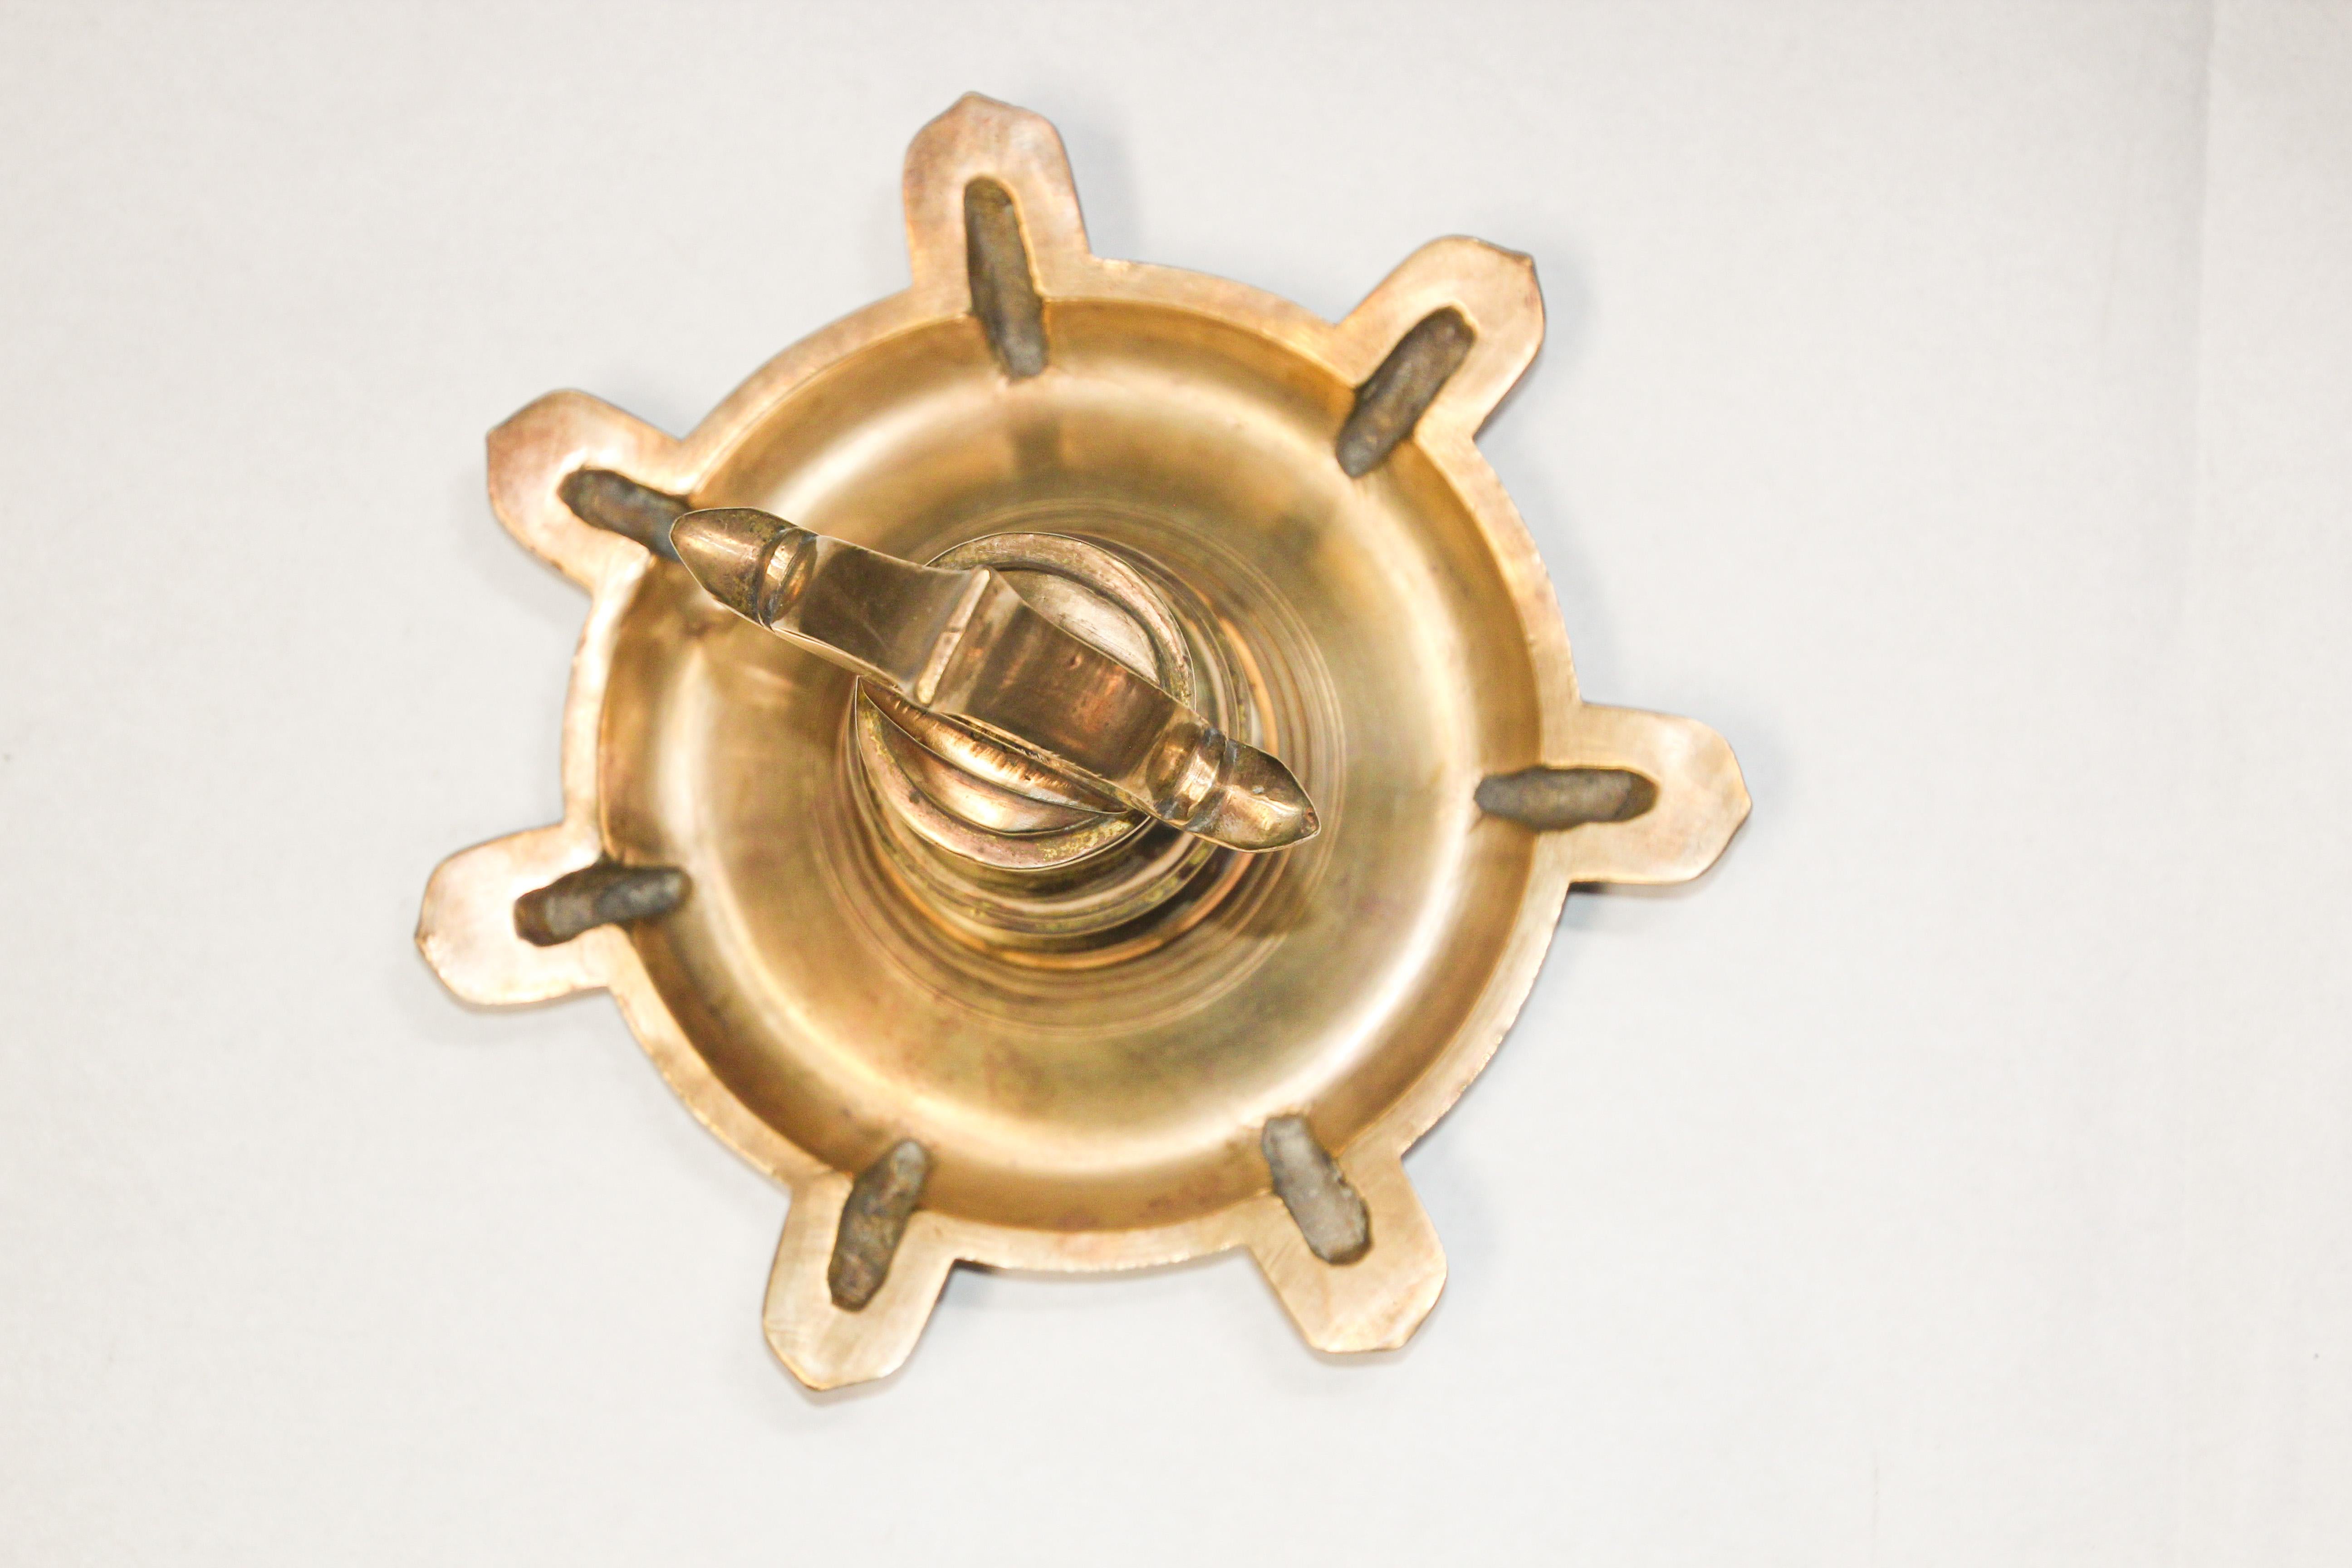 Brass Oil Lamp Traditional Temple Religious Asian Hindu Diya Art India 1900 For Sale 3